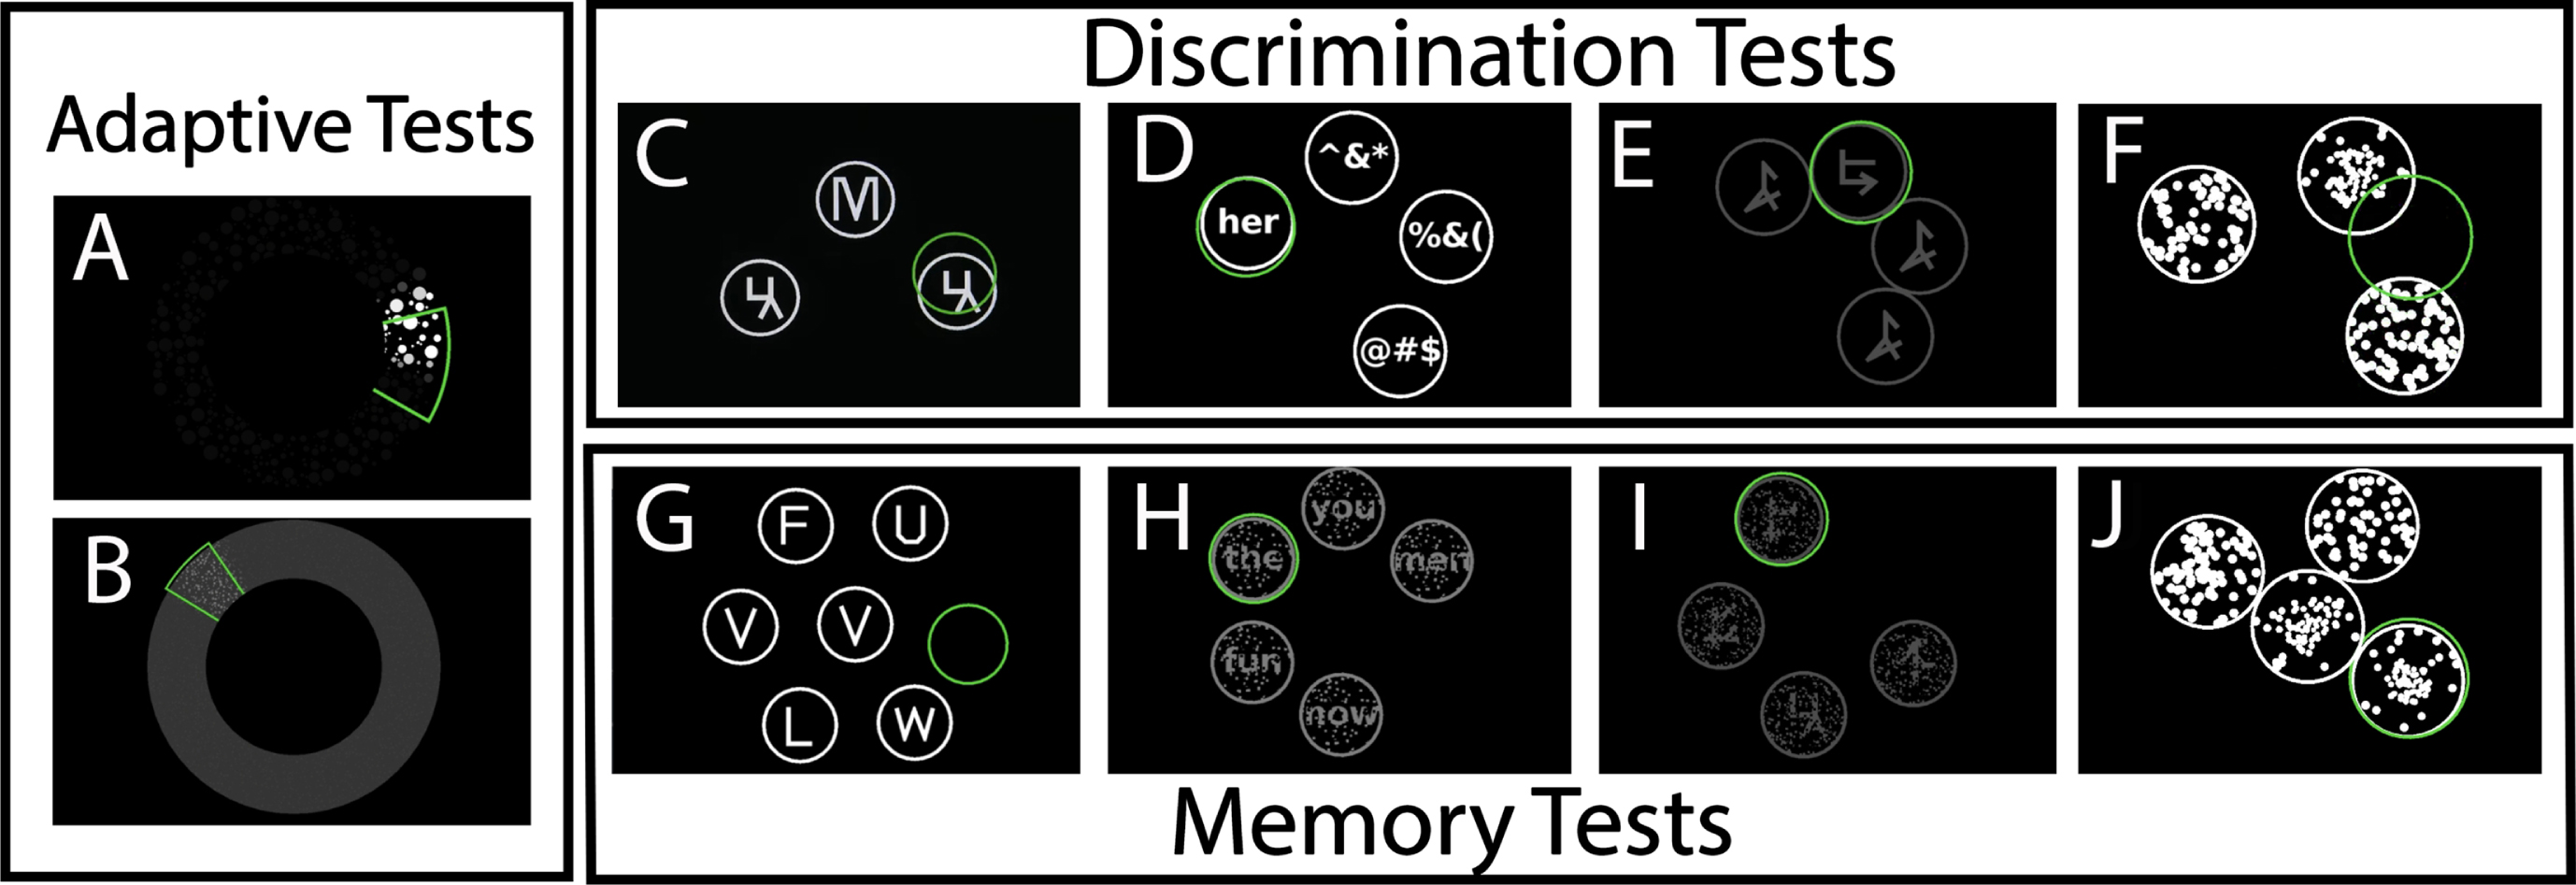 Representative Panels of the 10 Subtests in Cognivue Clarity demonstrating the (a) two tests used for the adaptive psychophysics component – Adaptive motor skill (A) and visual salience (B); (b) the 4 tests used for Discrimination – Letter discrimination (C), Word discrimination (D), shape discrimination (E), and motion discrimination (F); and (c) the 4 tests used for delayed memory – Letter memory (G), Word memory (H), shape memory (I), and motion memory (J).